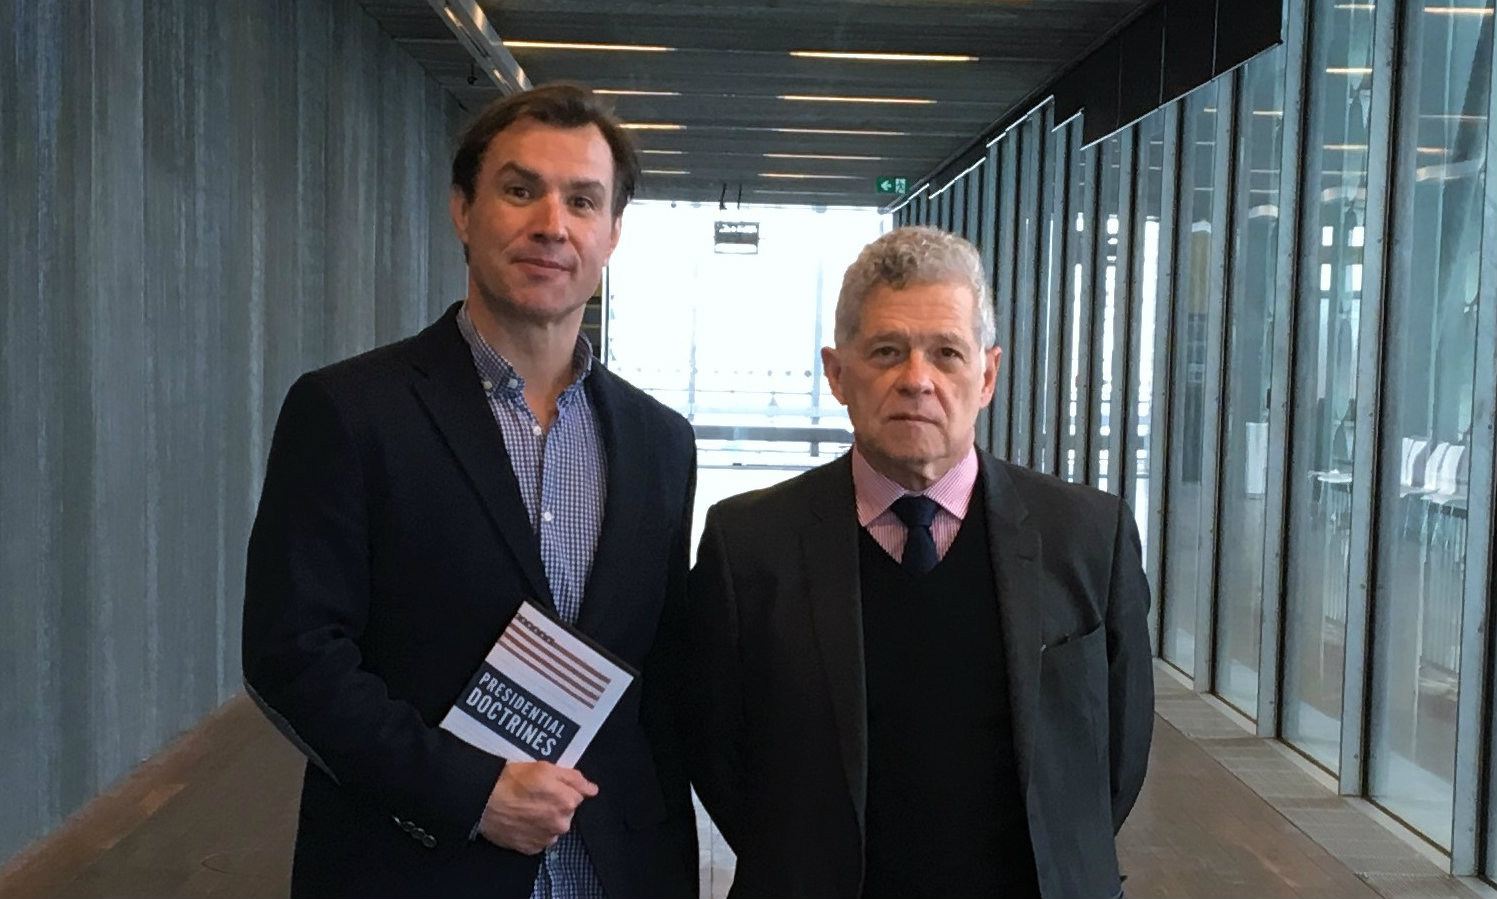 Dr Aiden Warren and Professor Joseph Siracusa with their newly released publication Presidential Doctrines: U.S. National Security from George Washington to Barack Obama